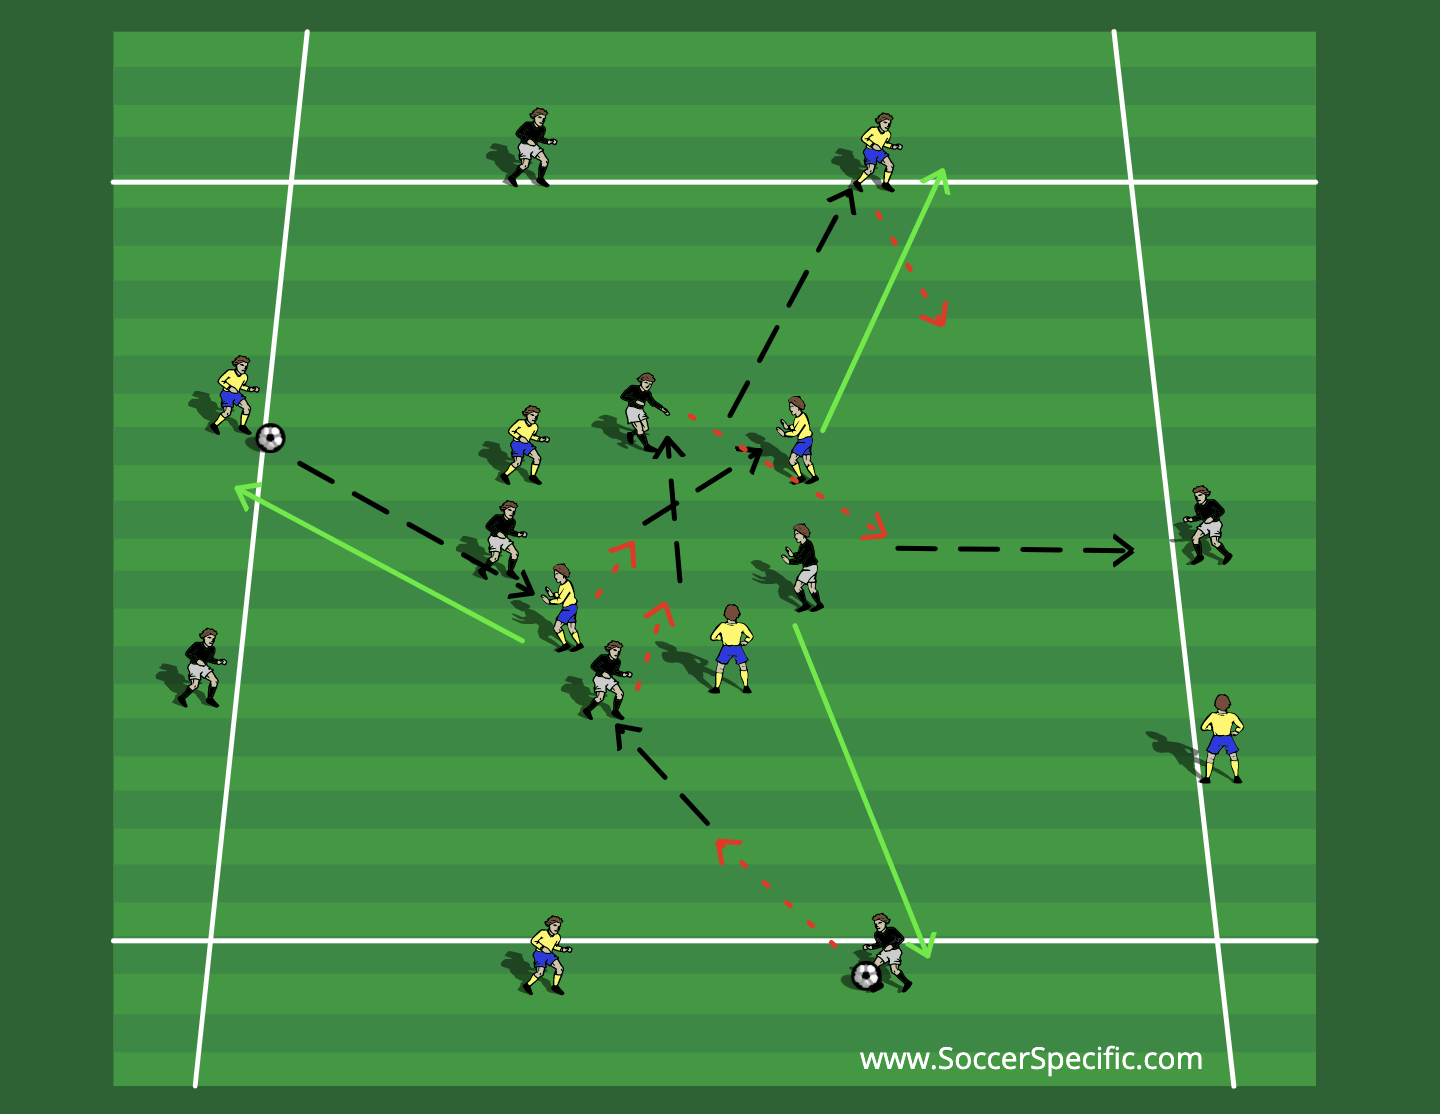 Switching Play 1 | SoccerSpecific.com